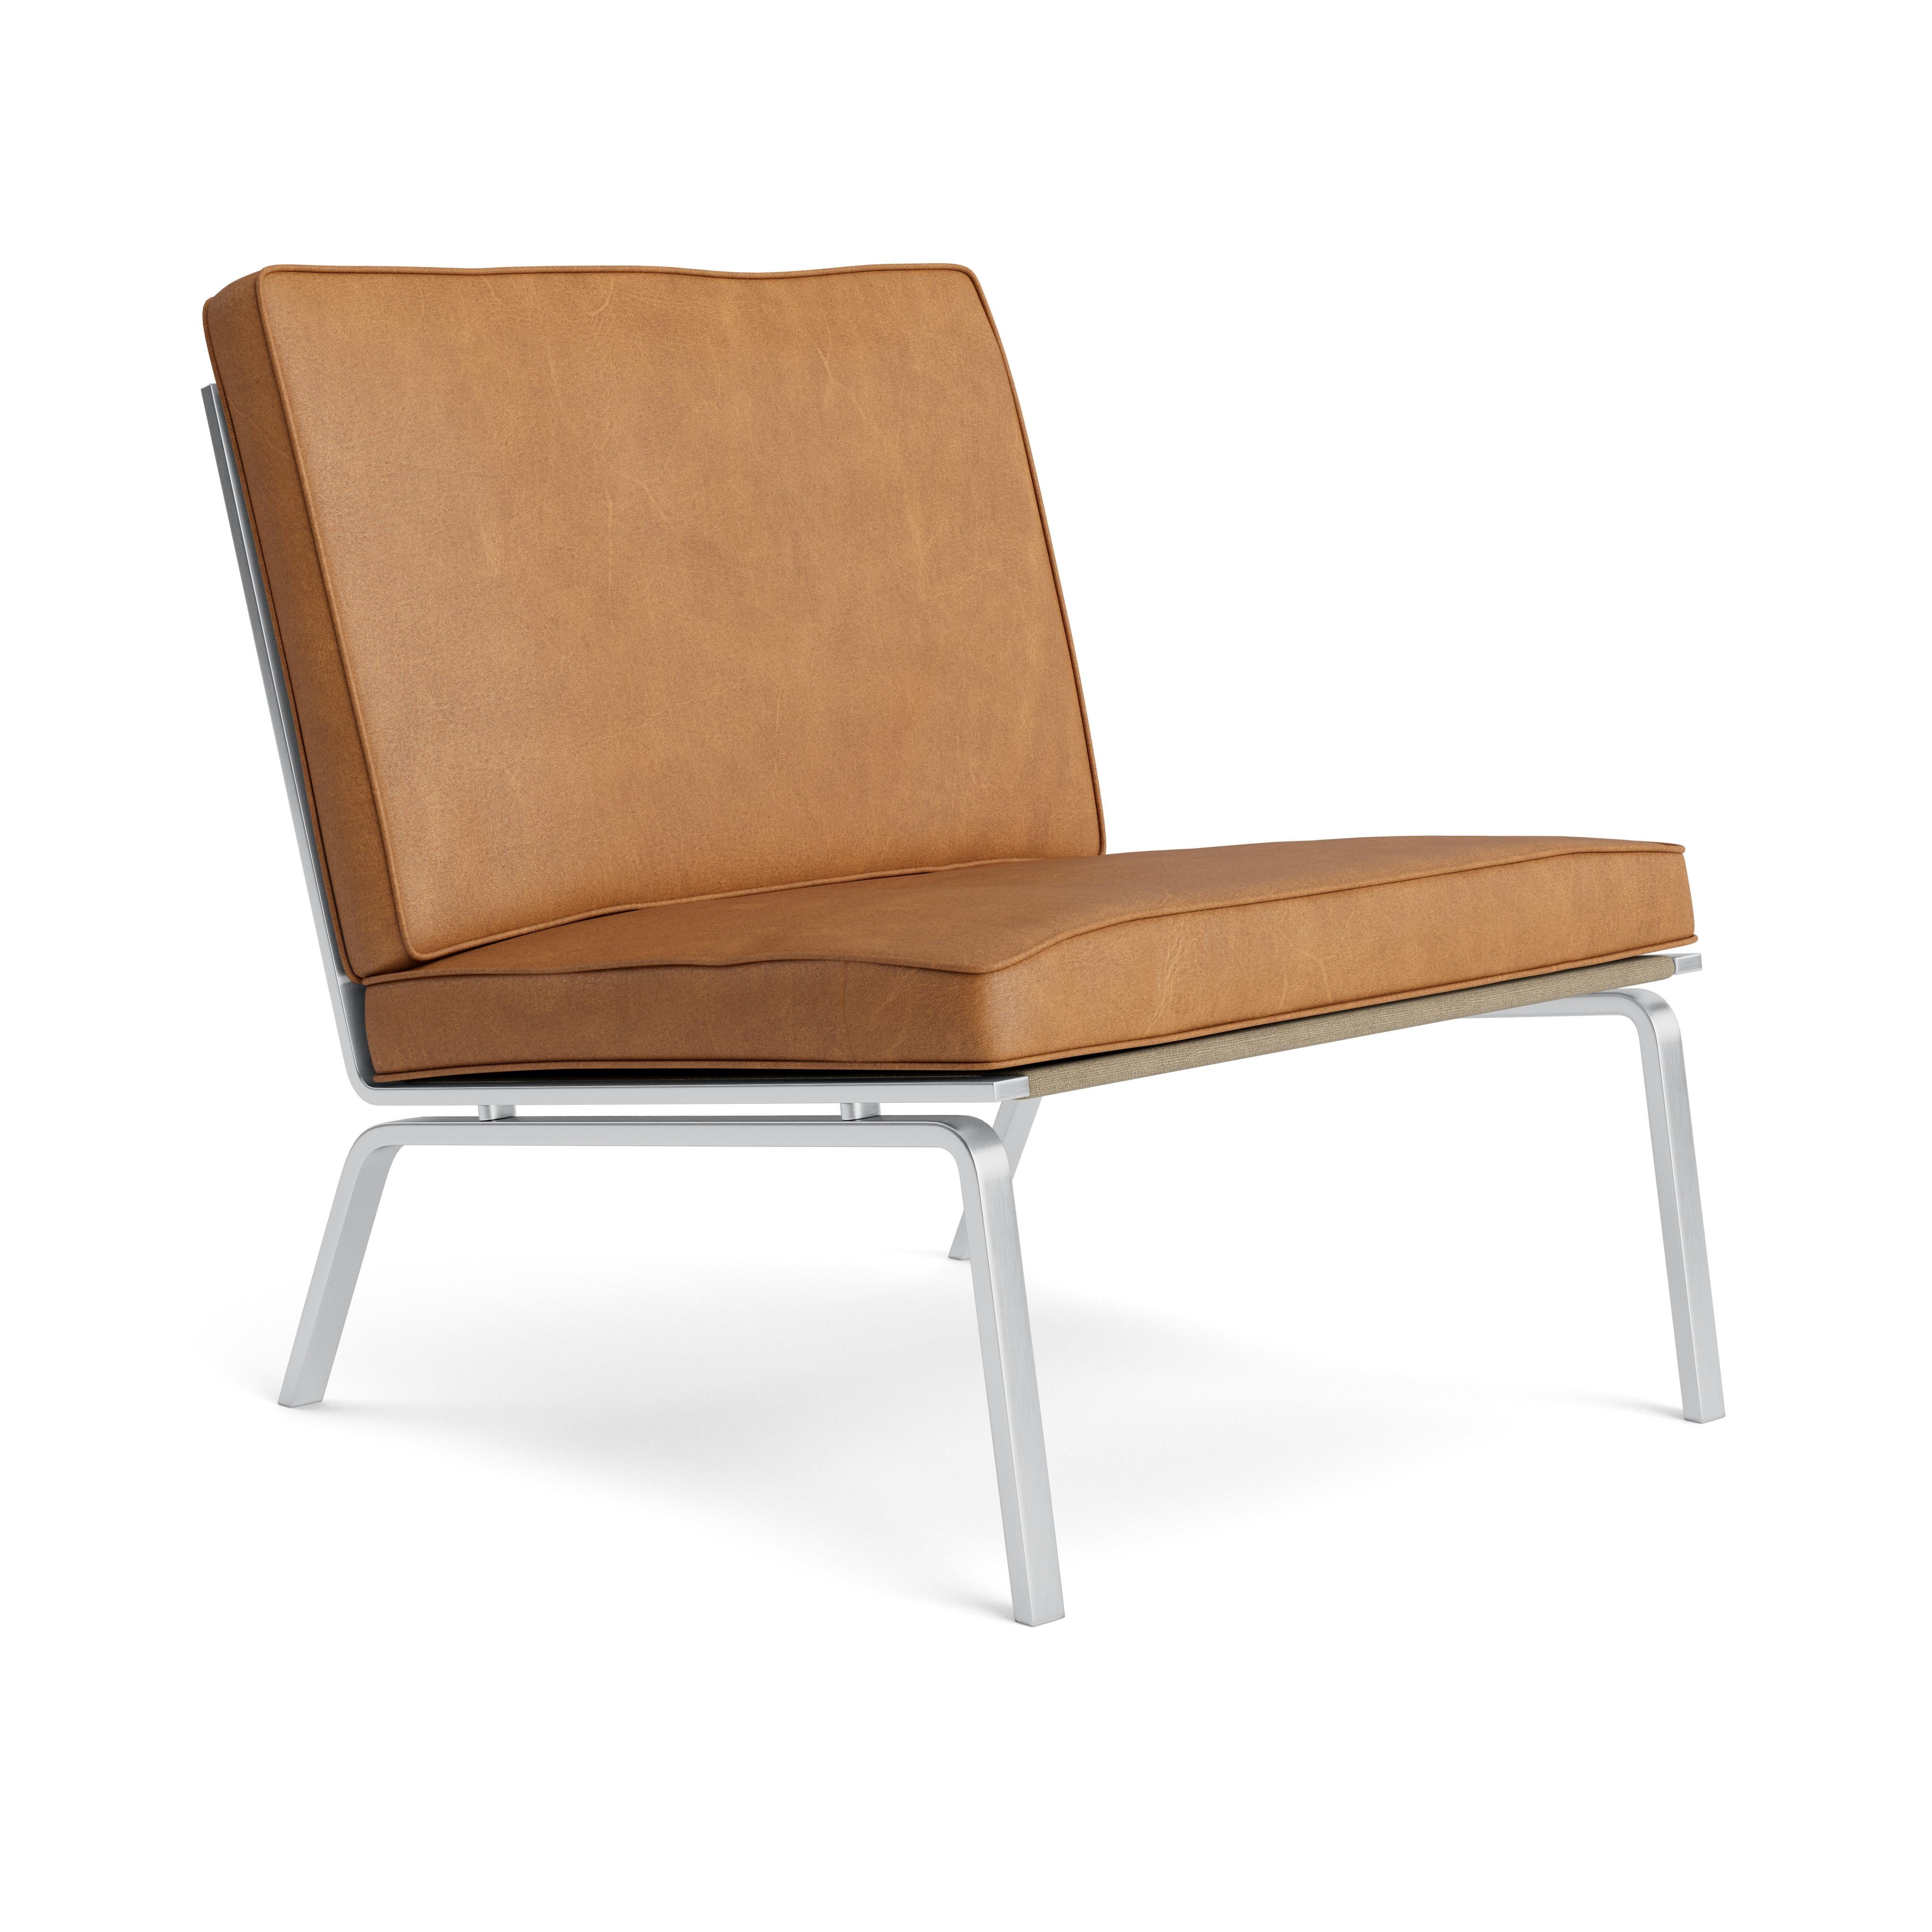 Man Lounge Chair by NORR11
Dimensions: D 74 x W 67 x H 75 cm. SH 37 cm. 
Materials: Stainless steel, canvas and leather. 
Upholstery: Dunes Cognac.
Weight: 23 kg.

Available in different upholstery options. Please contact us. 

The collection